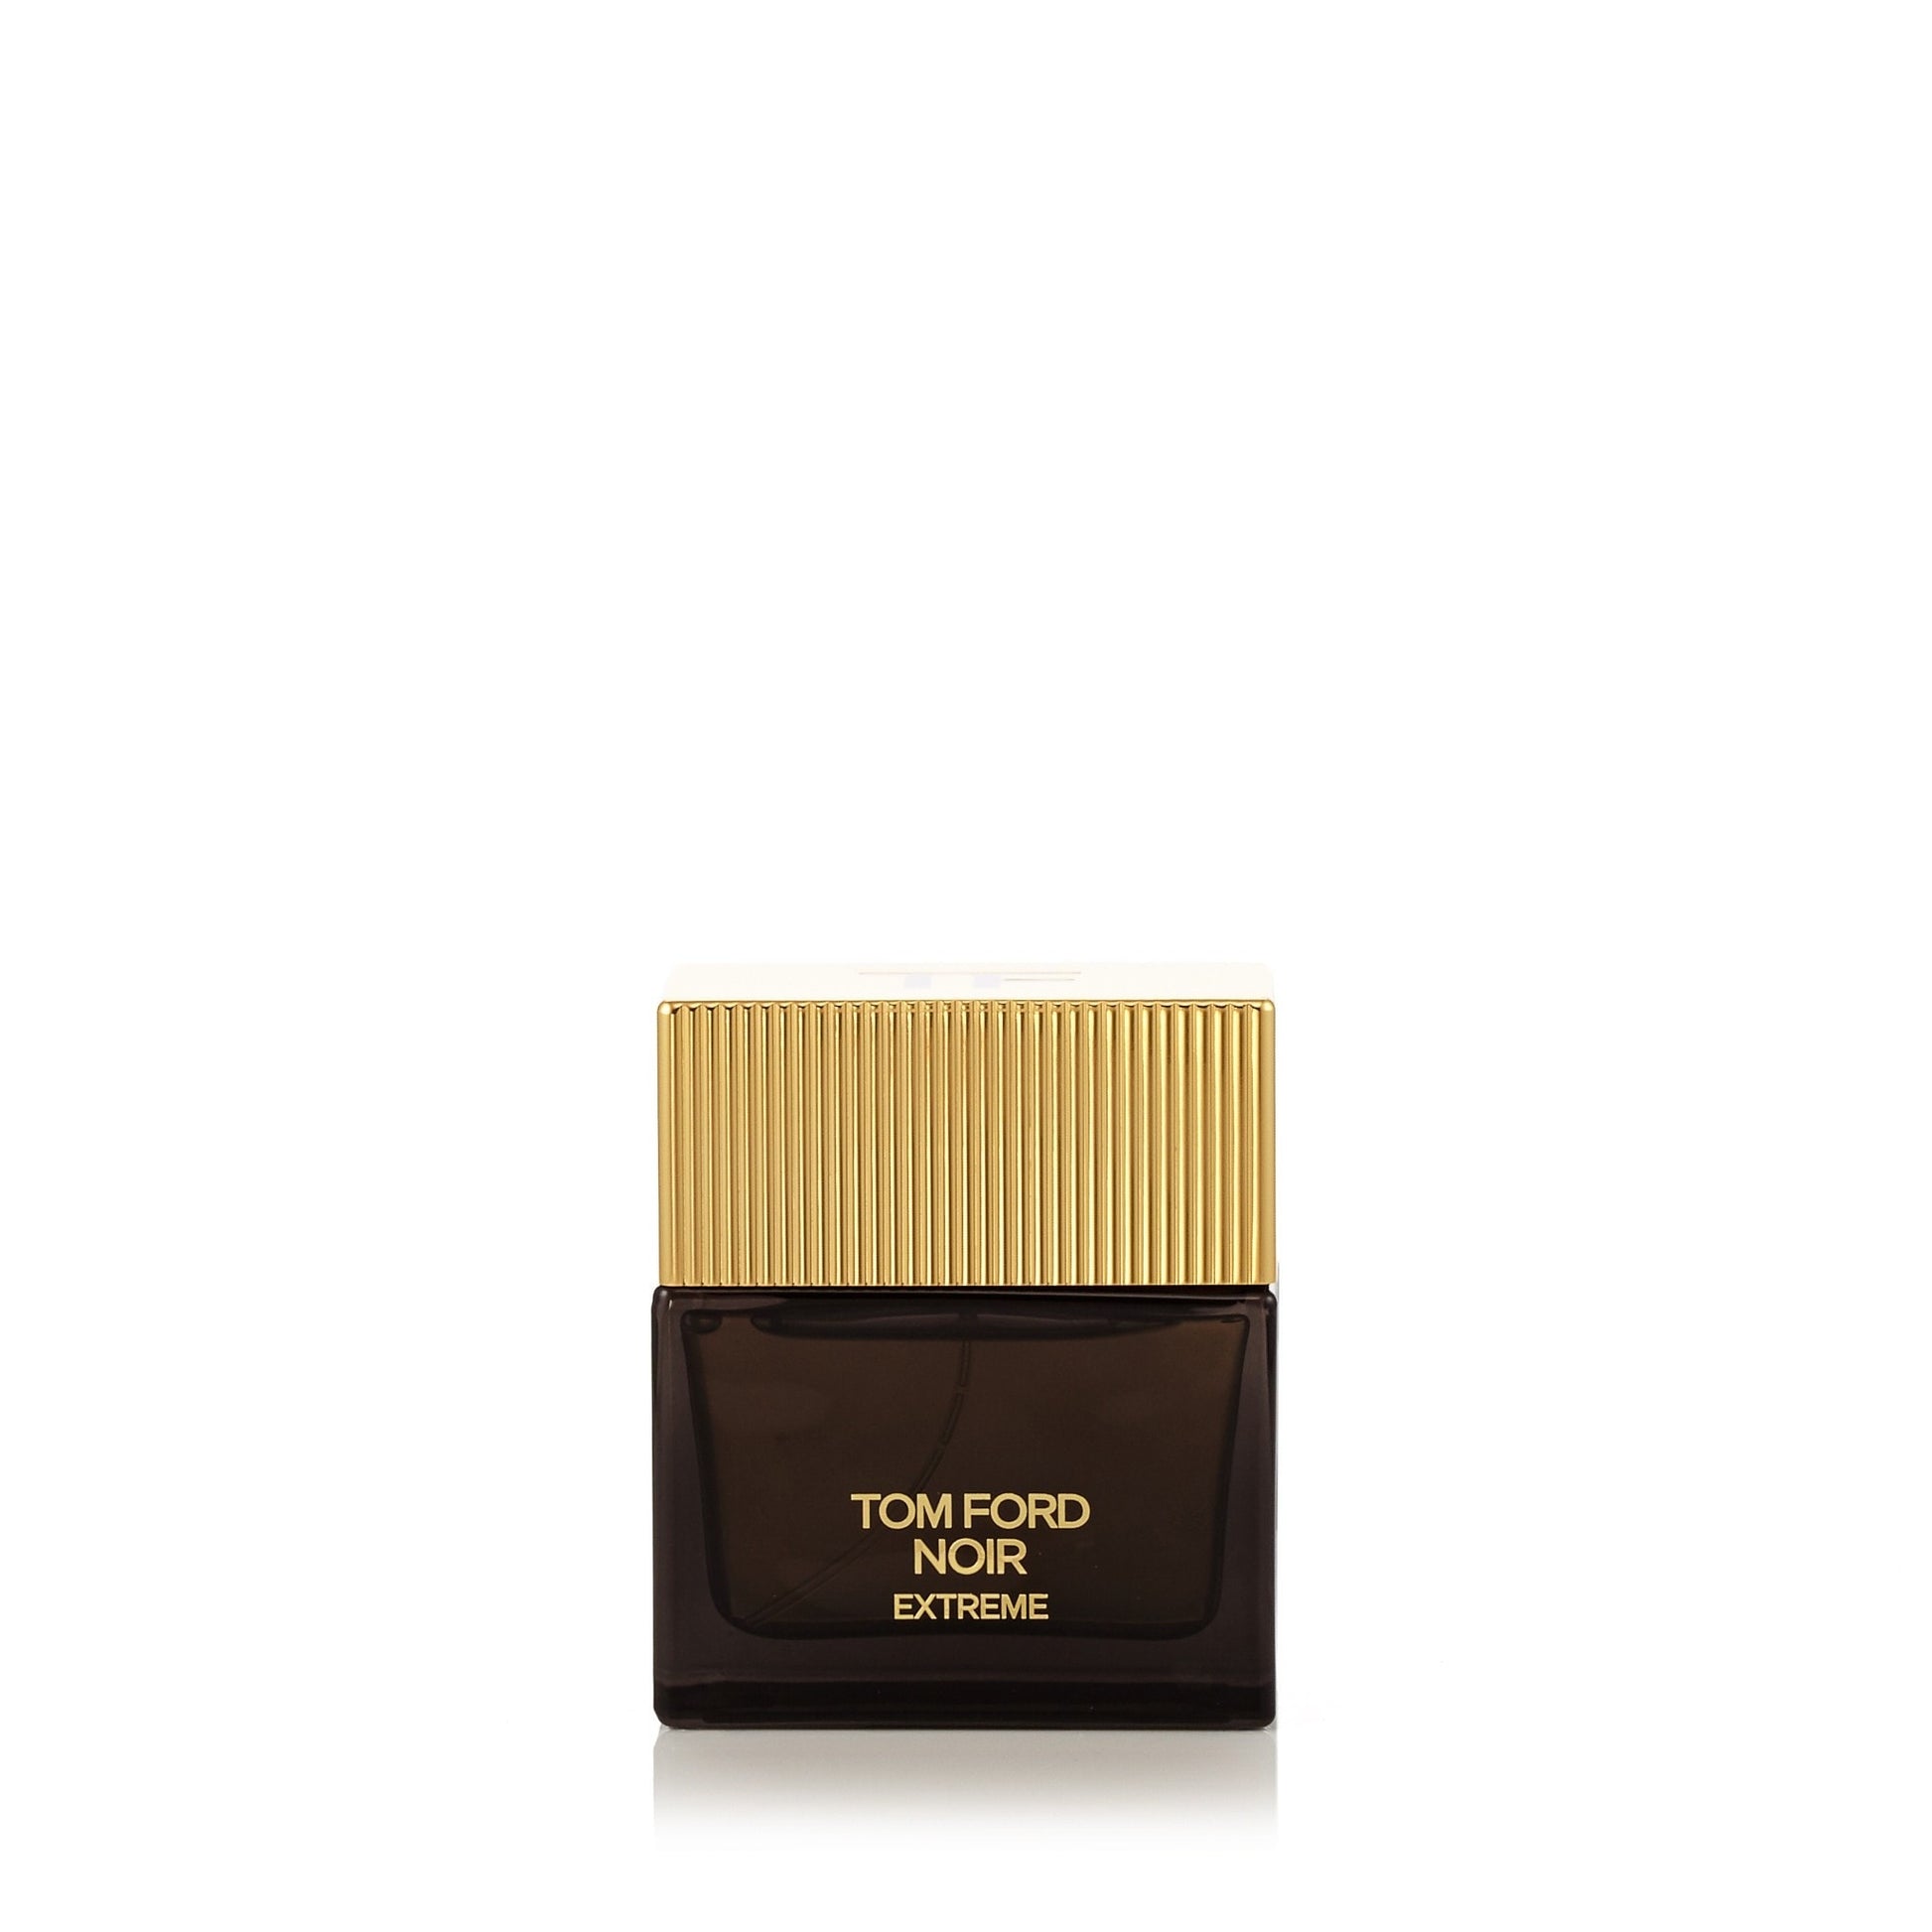 Tom Ford Noir Extreme Eau de Parfum Spray for Men by Tom Ford 1.7 oz. Click to open in modal